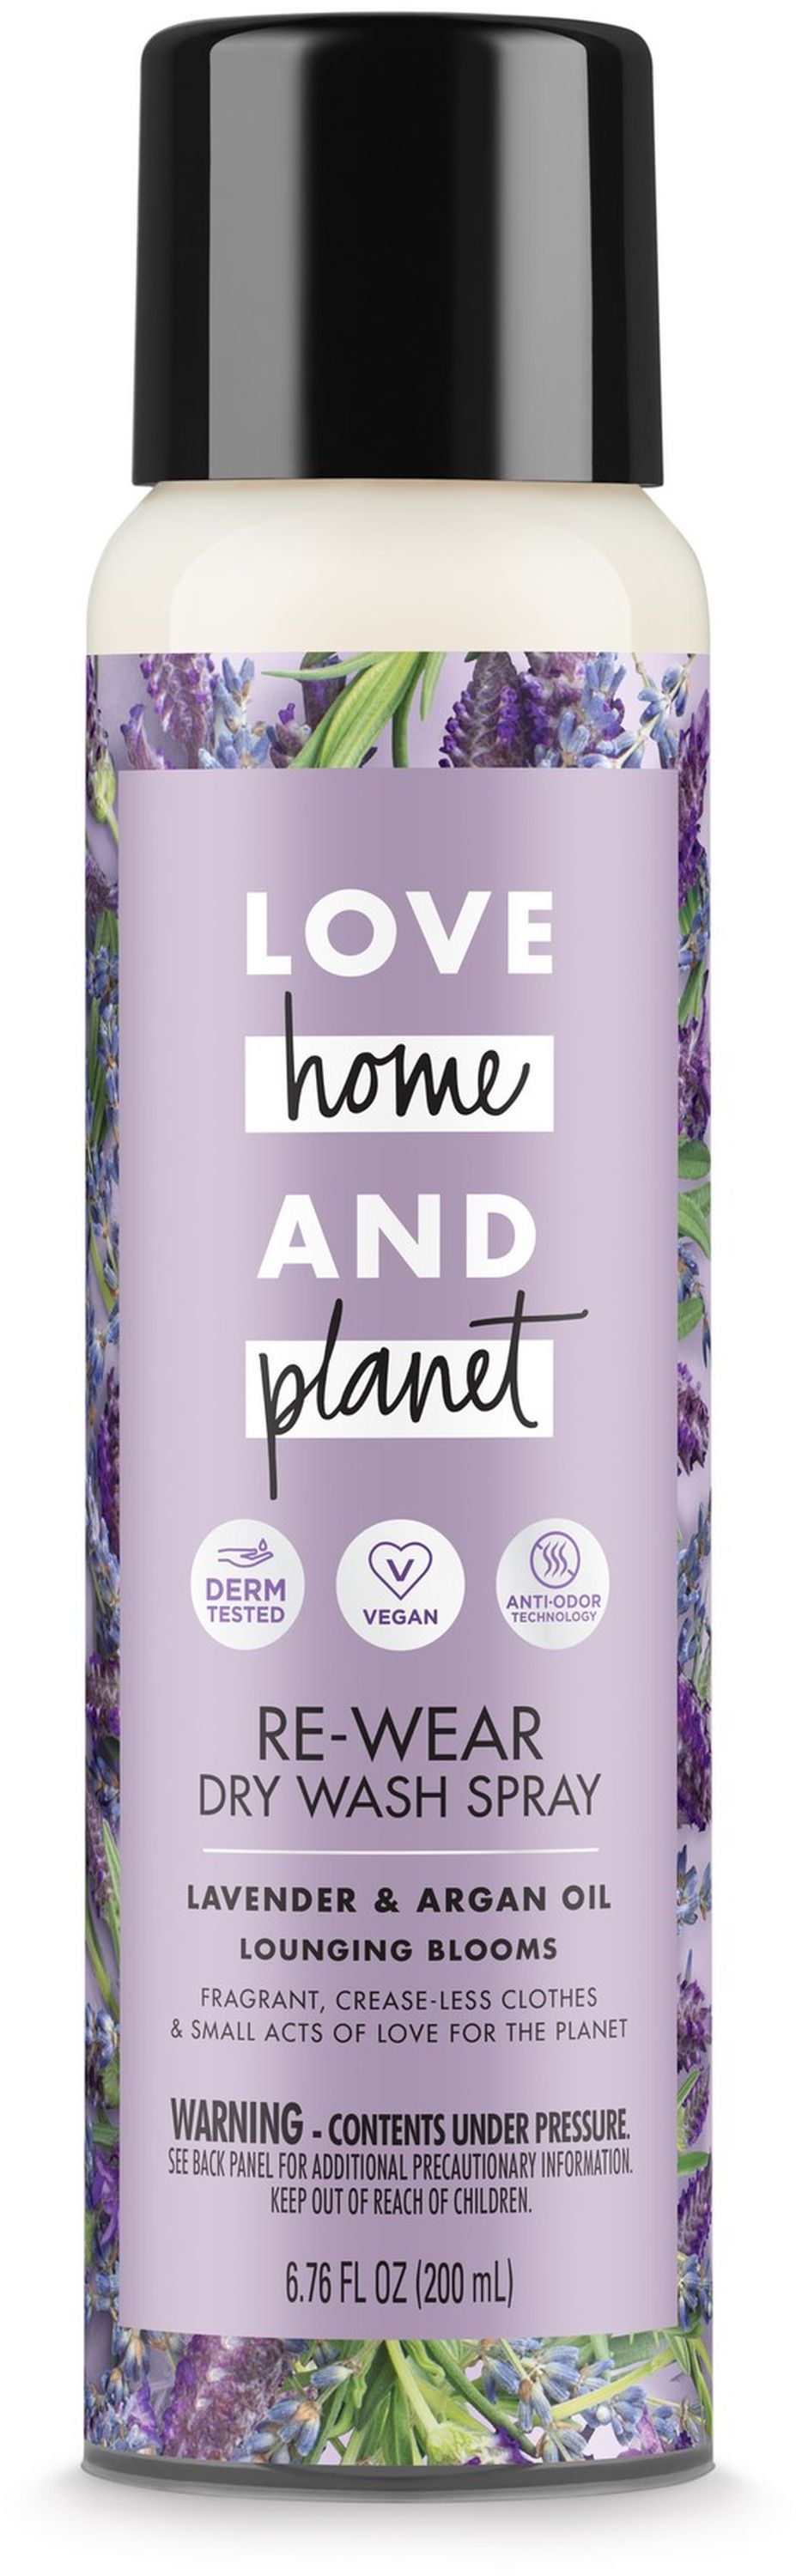 Love Home and Planet Dry Wash Spray Lavender & Argan Oil 6.7 oz - image 1 of 8